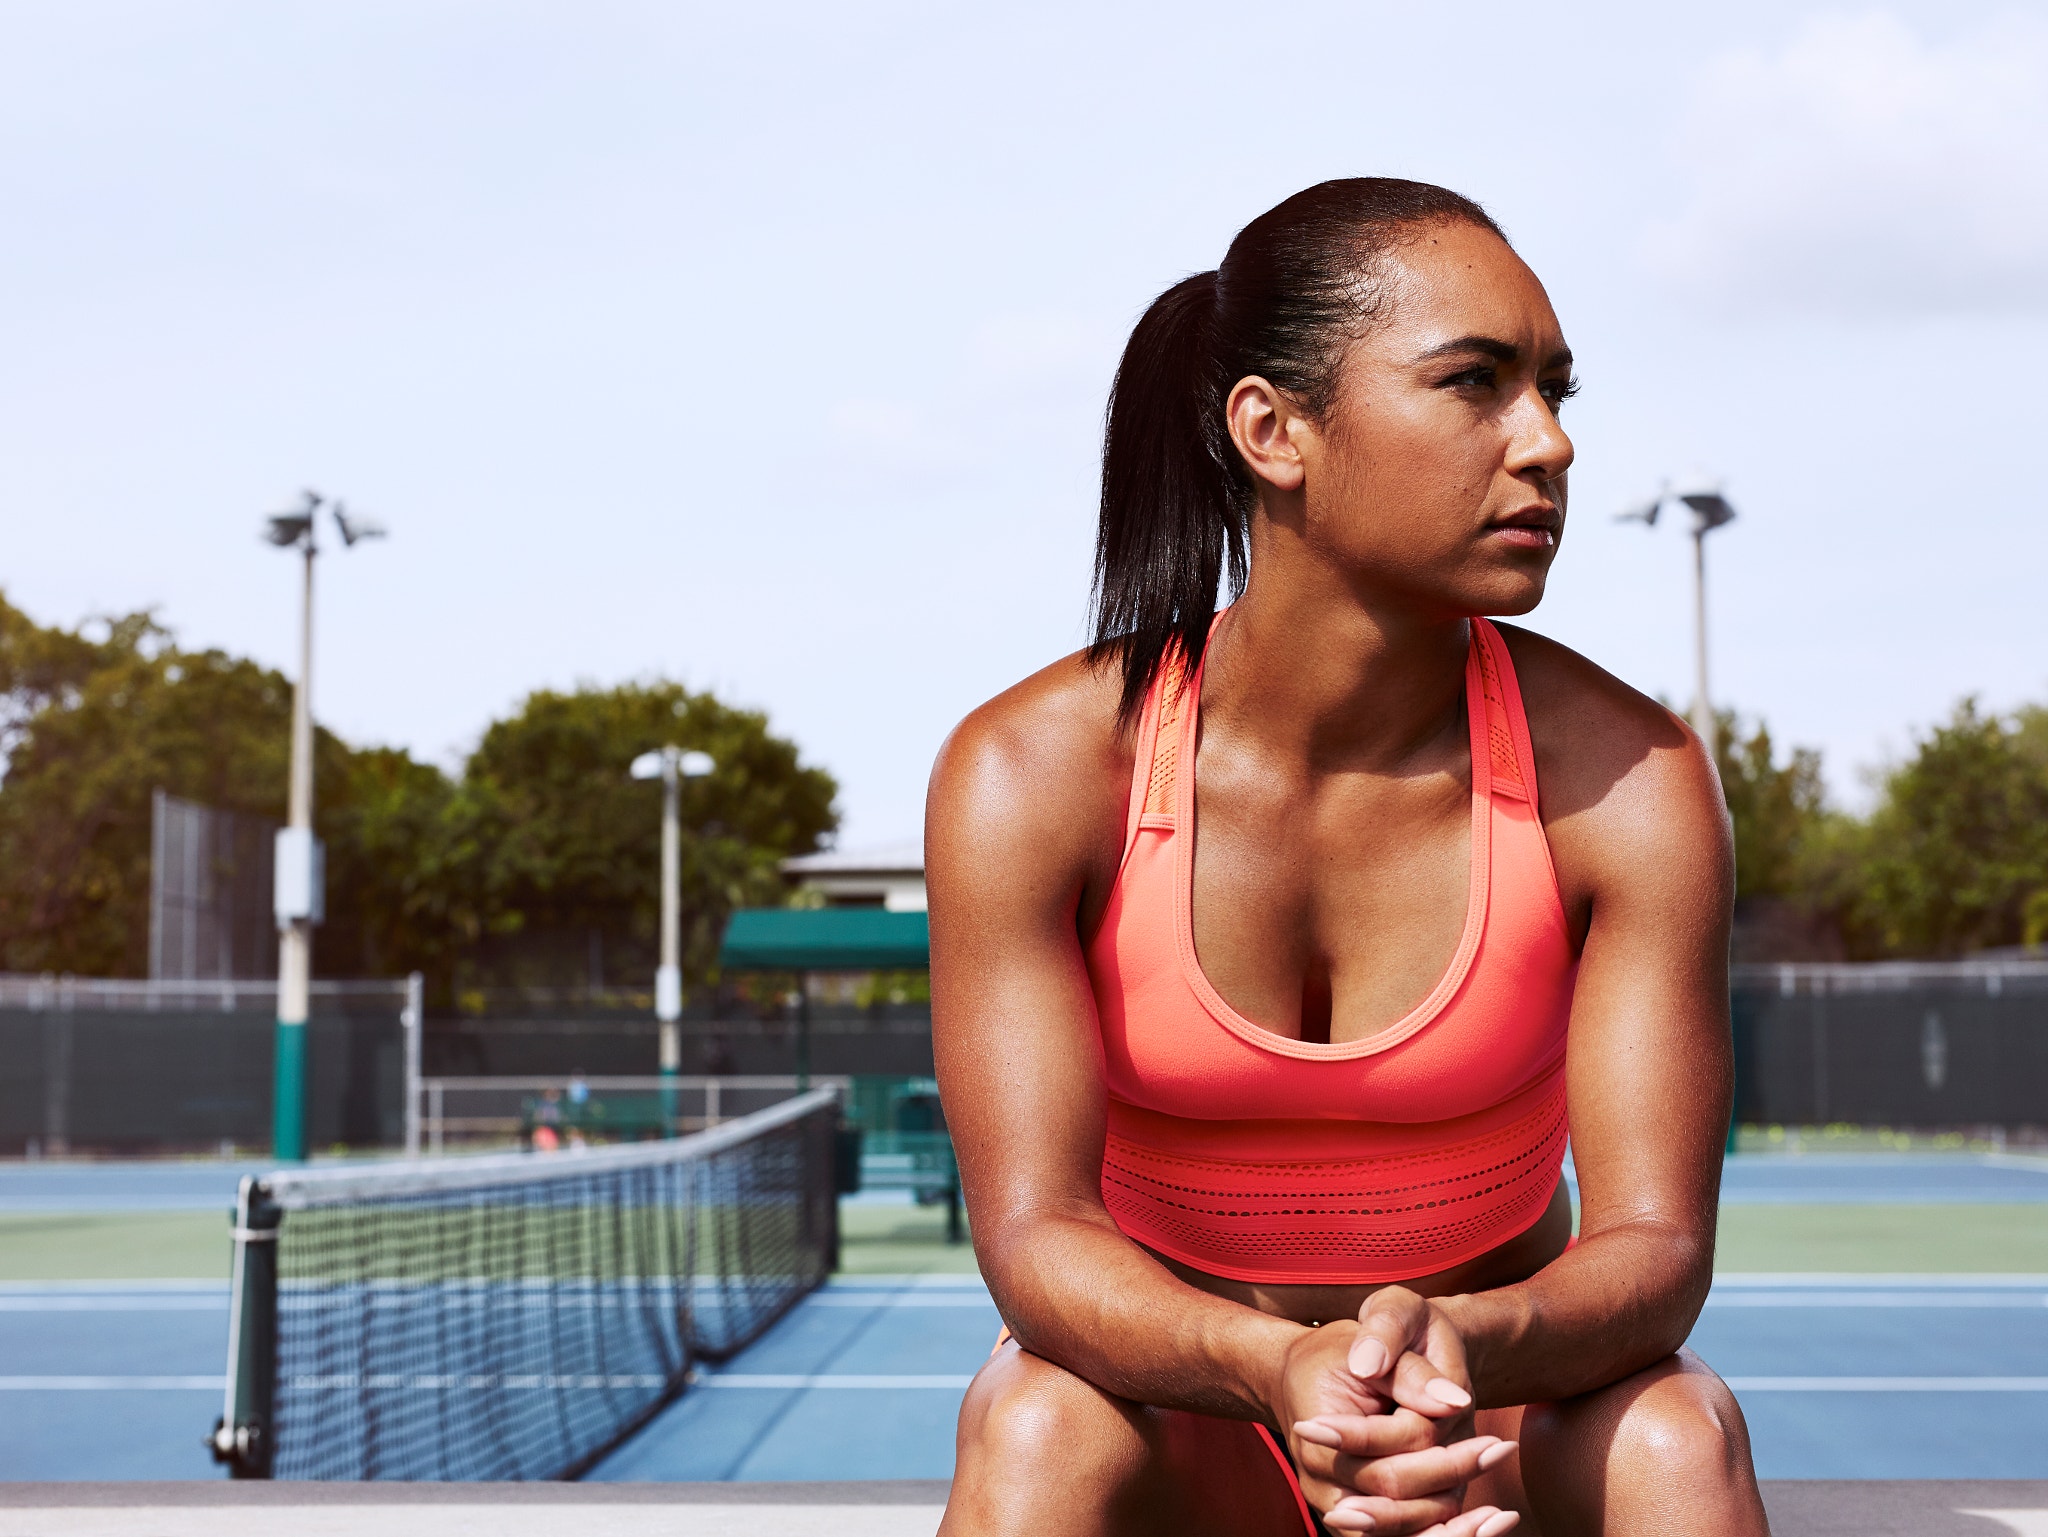 48 Hours in Miami: Photographing Pro Tennis Player Heather Watson